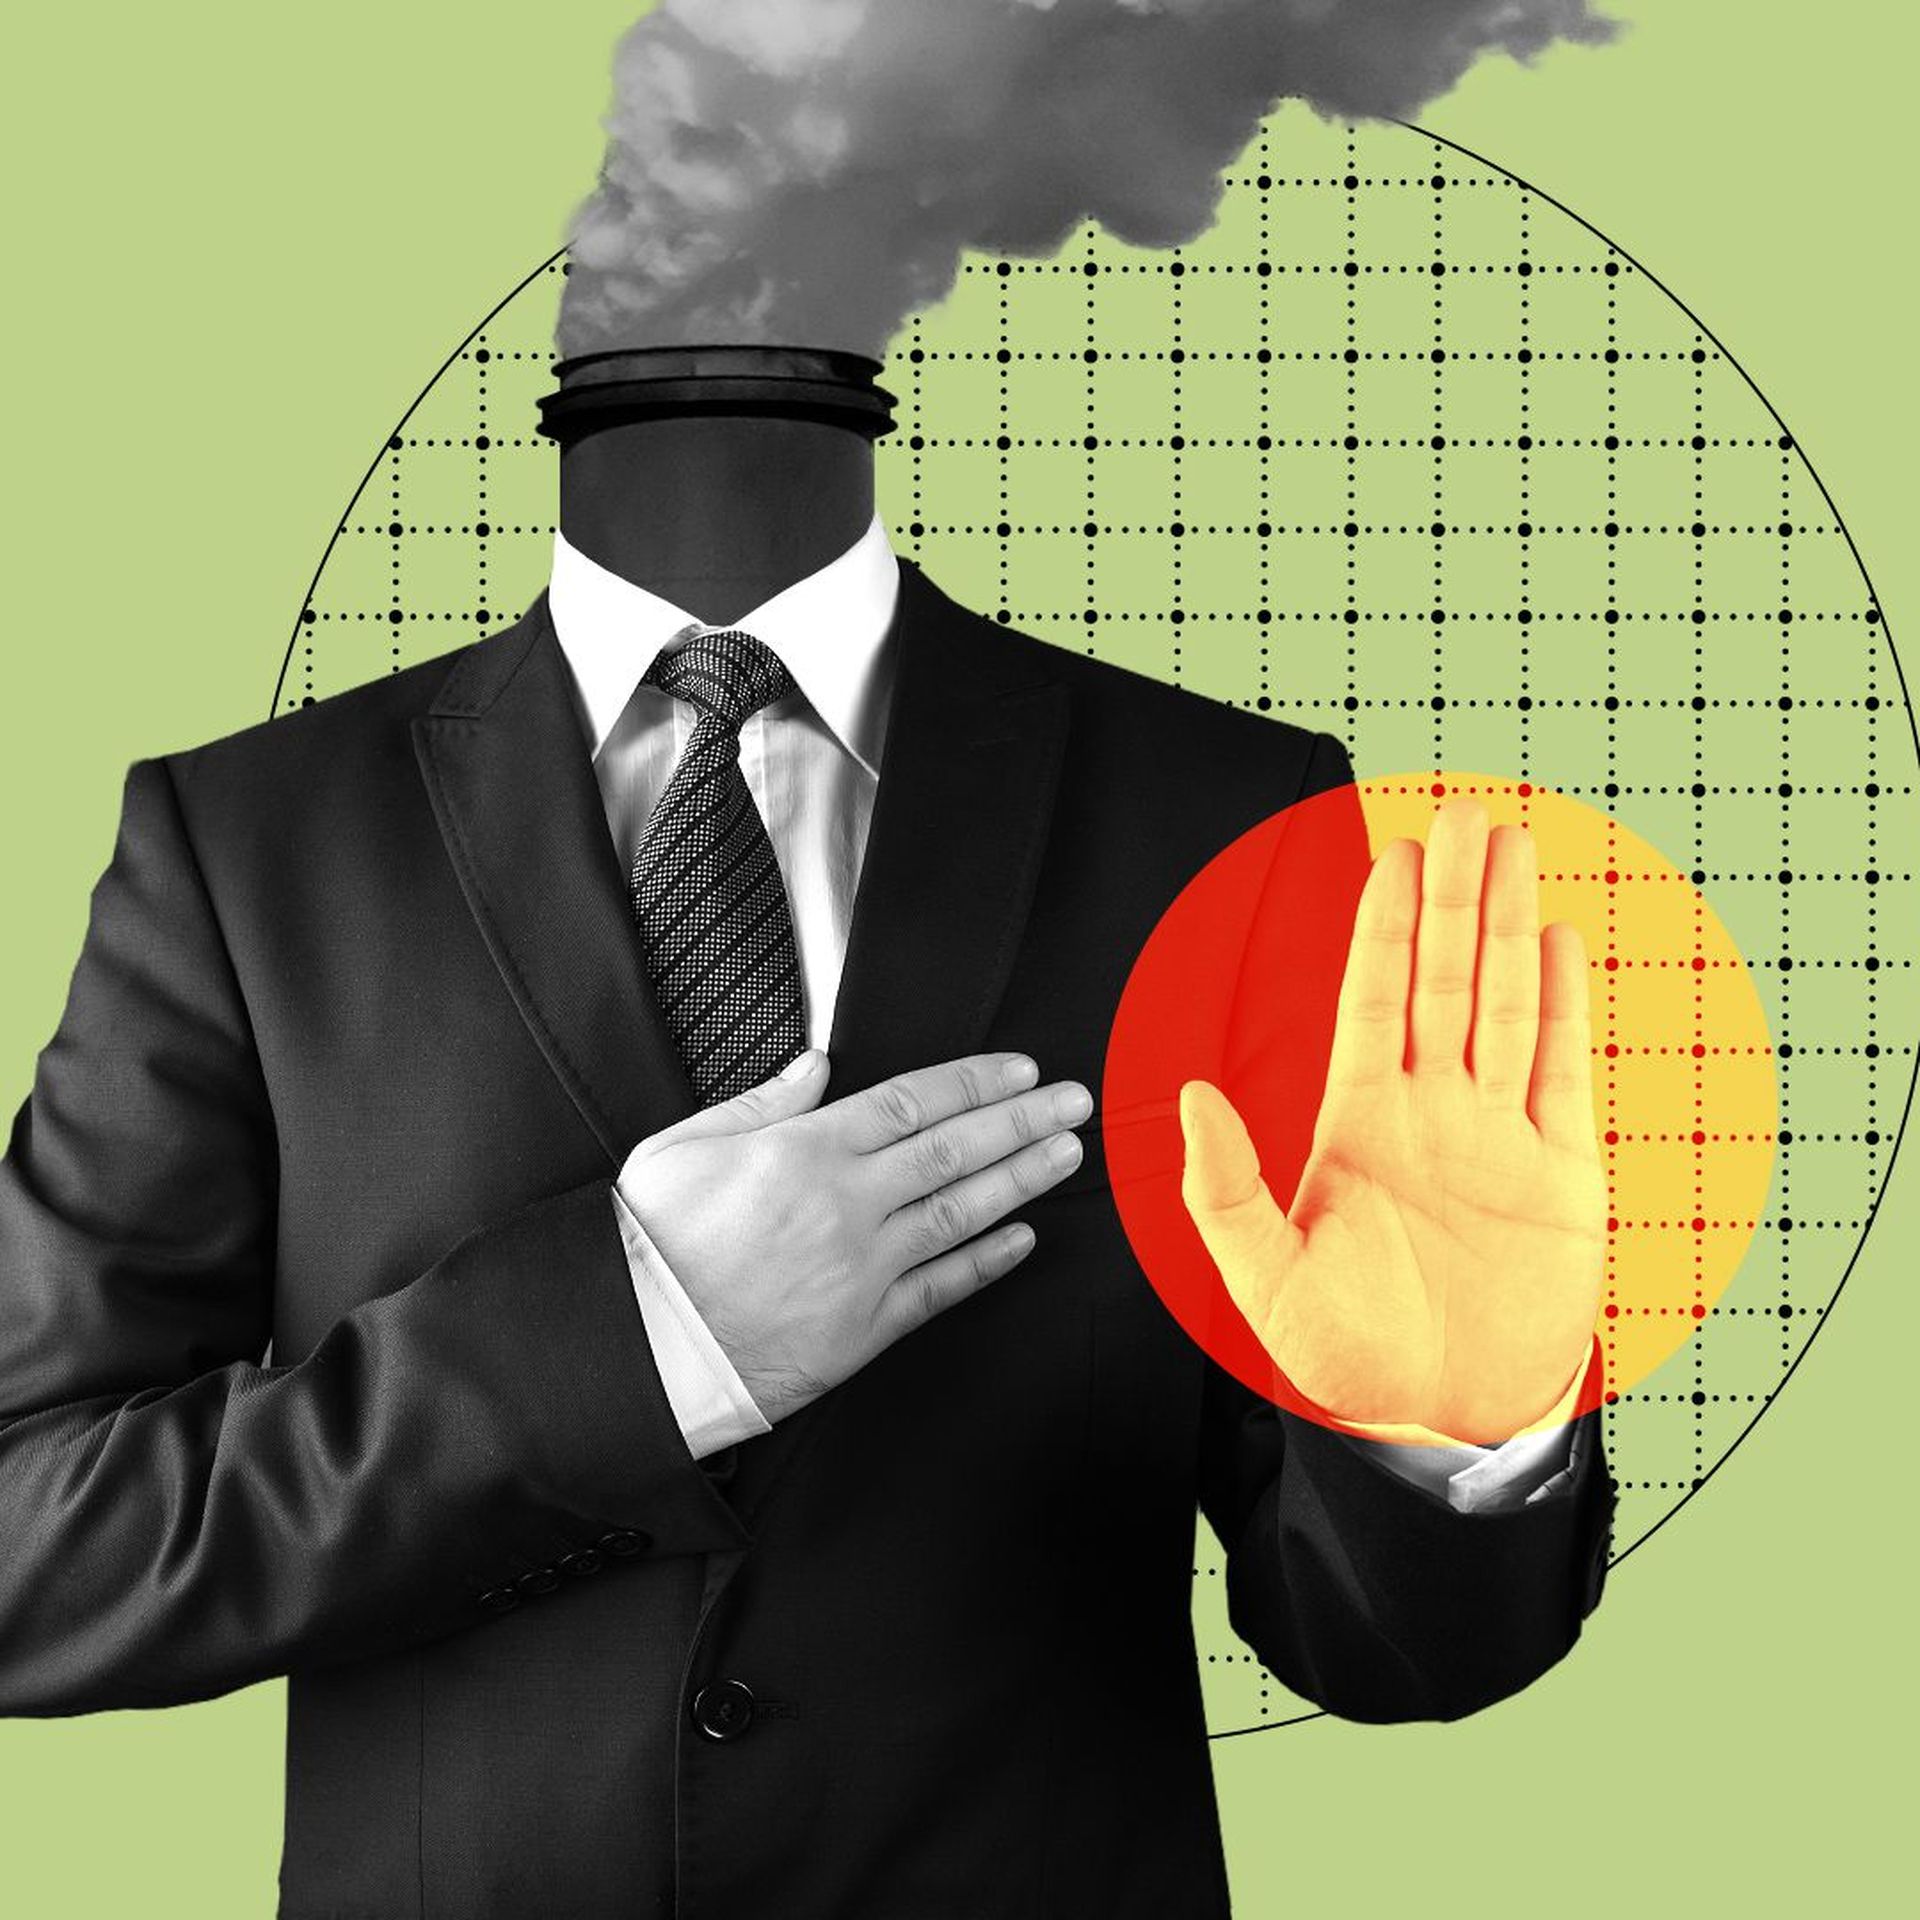 Illustration of a man in a suit pledging, and his head is a smokestack.